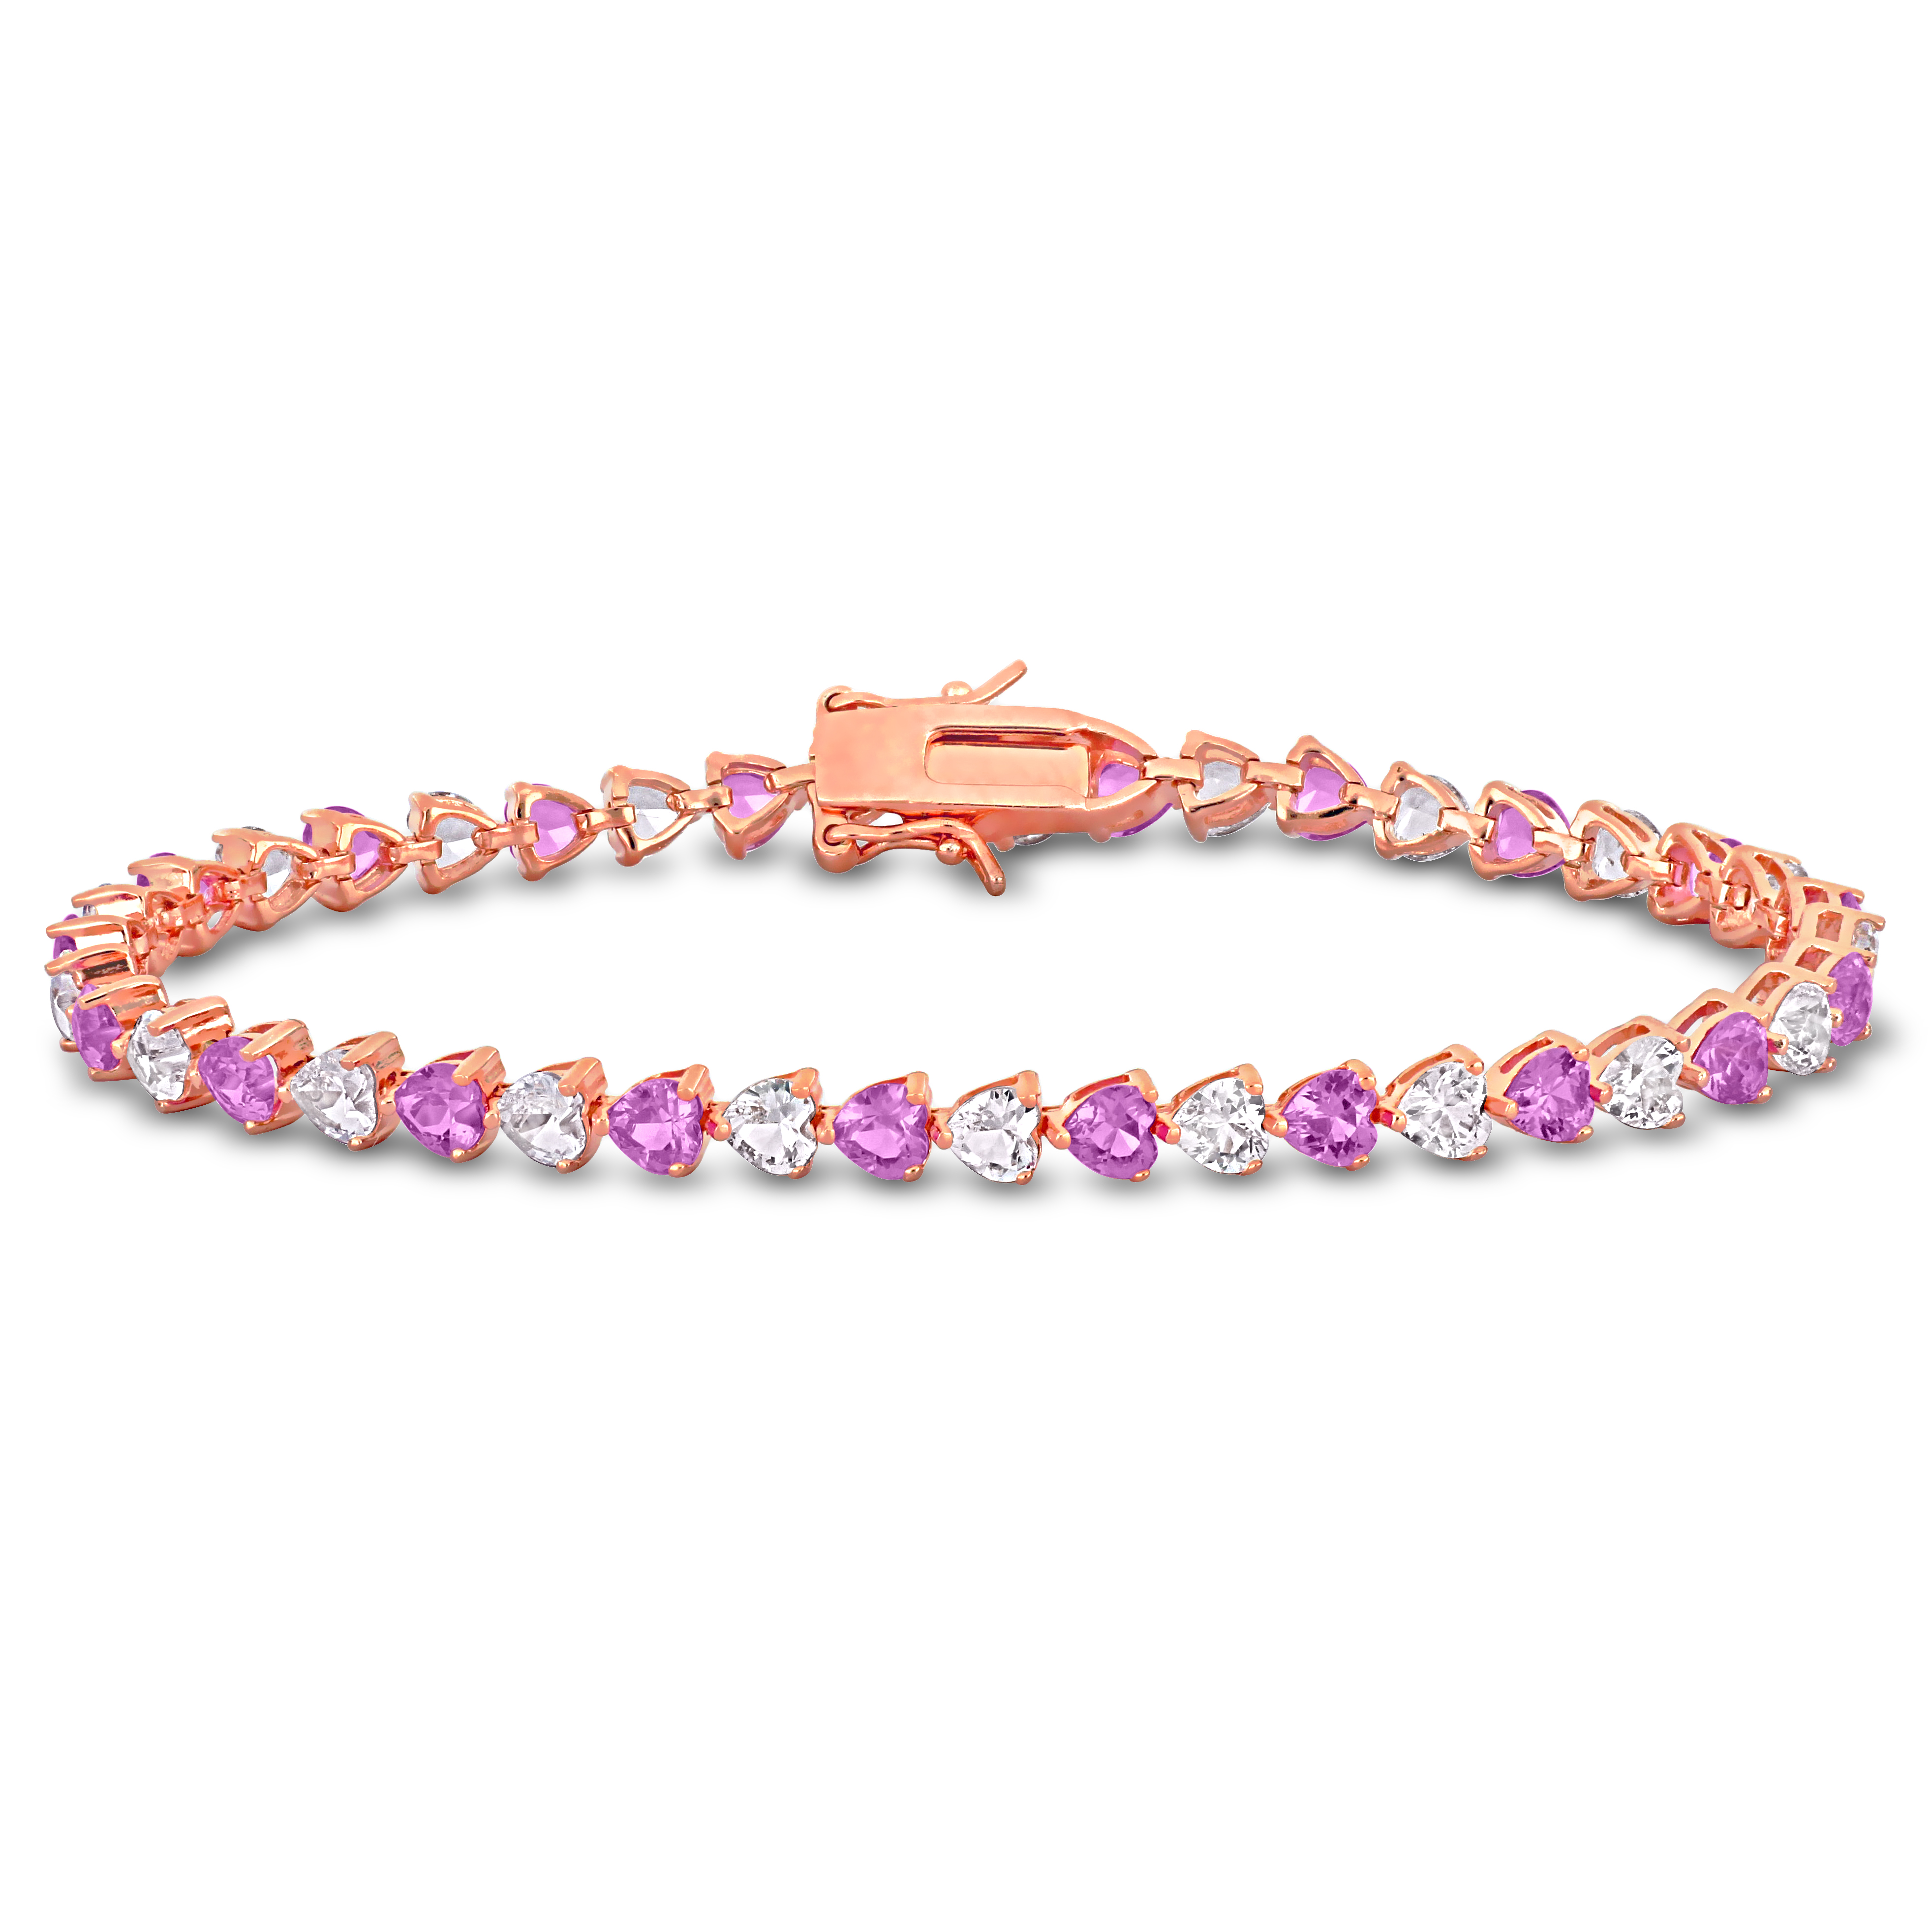 12 CT TGW Created Pink and White Heart-Cut Sapphire Bracelet in Rose Silver - 7.5 in.